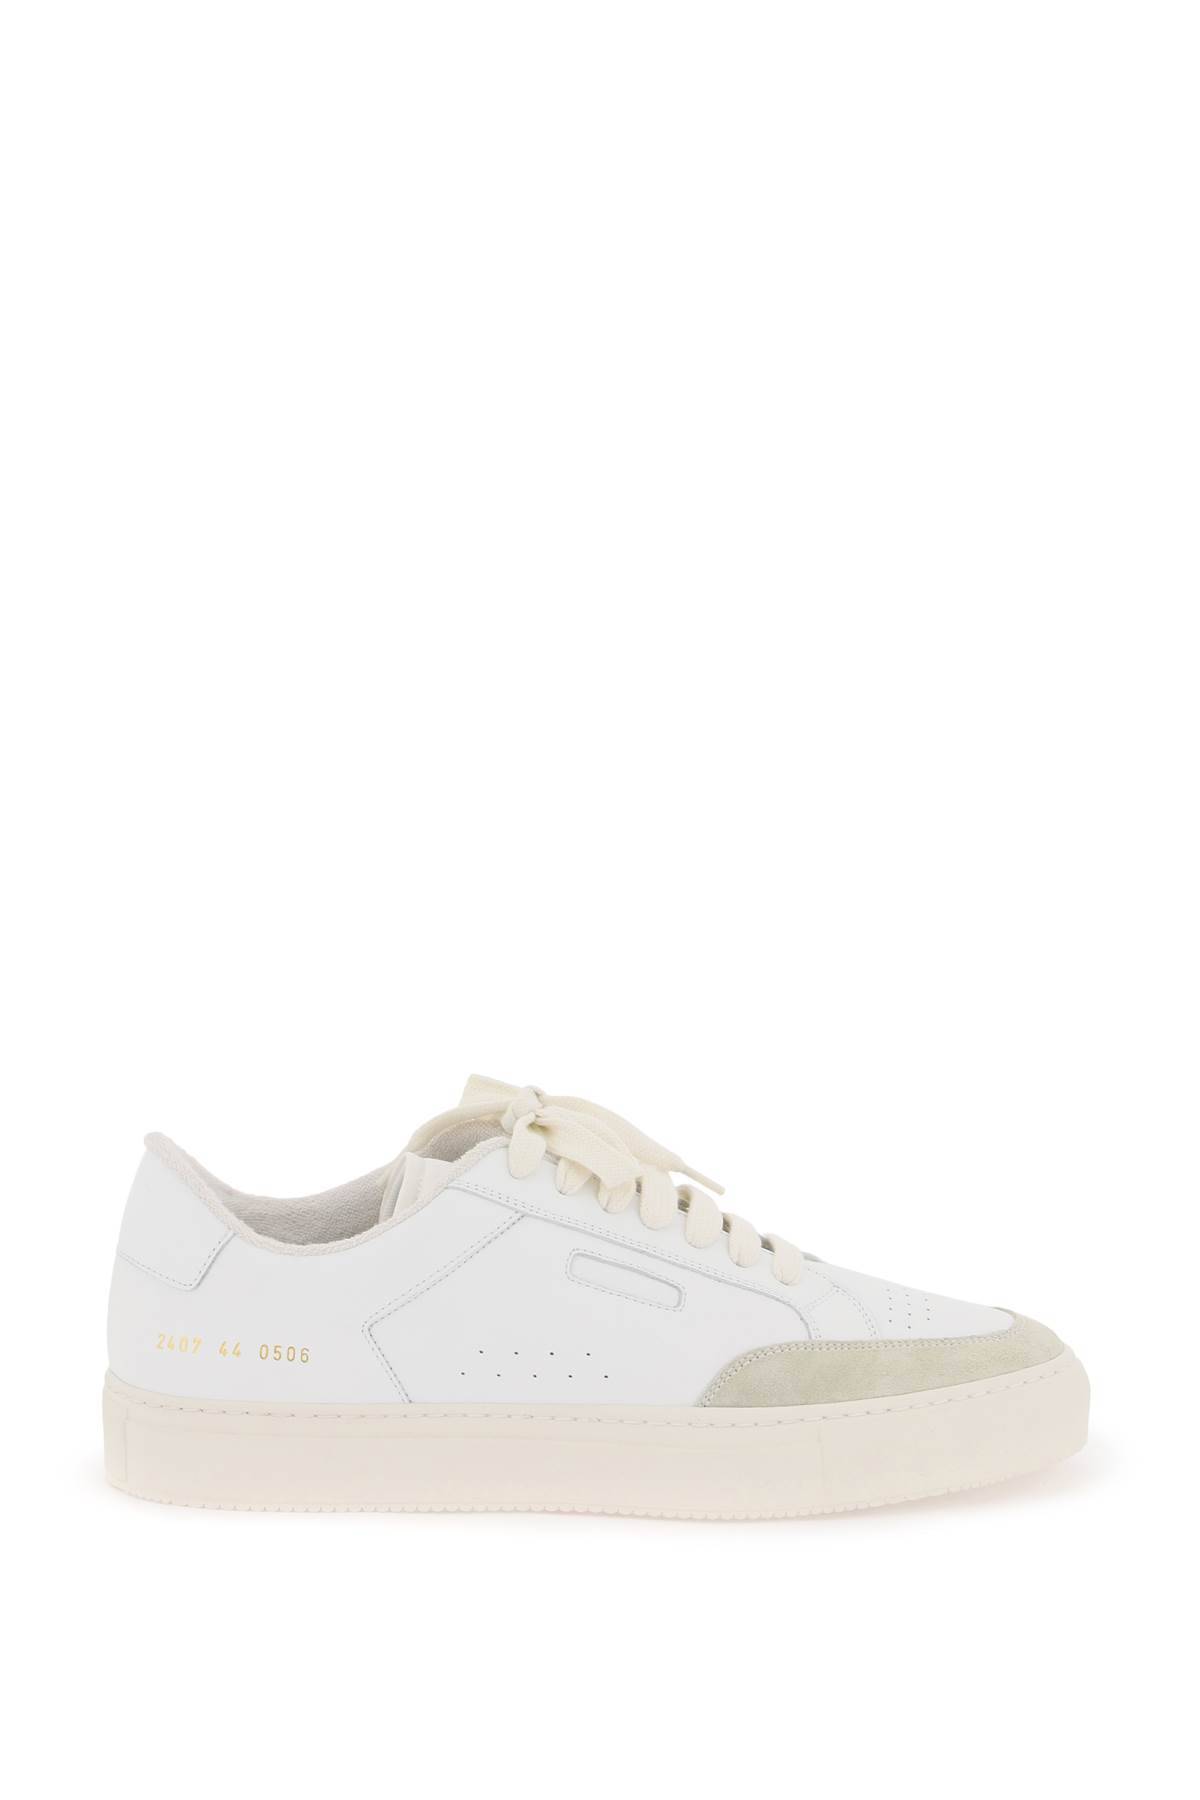 COMMON PROJECTS COMMON PROJECTS tennis pro sneakers